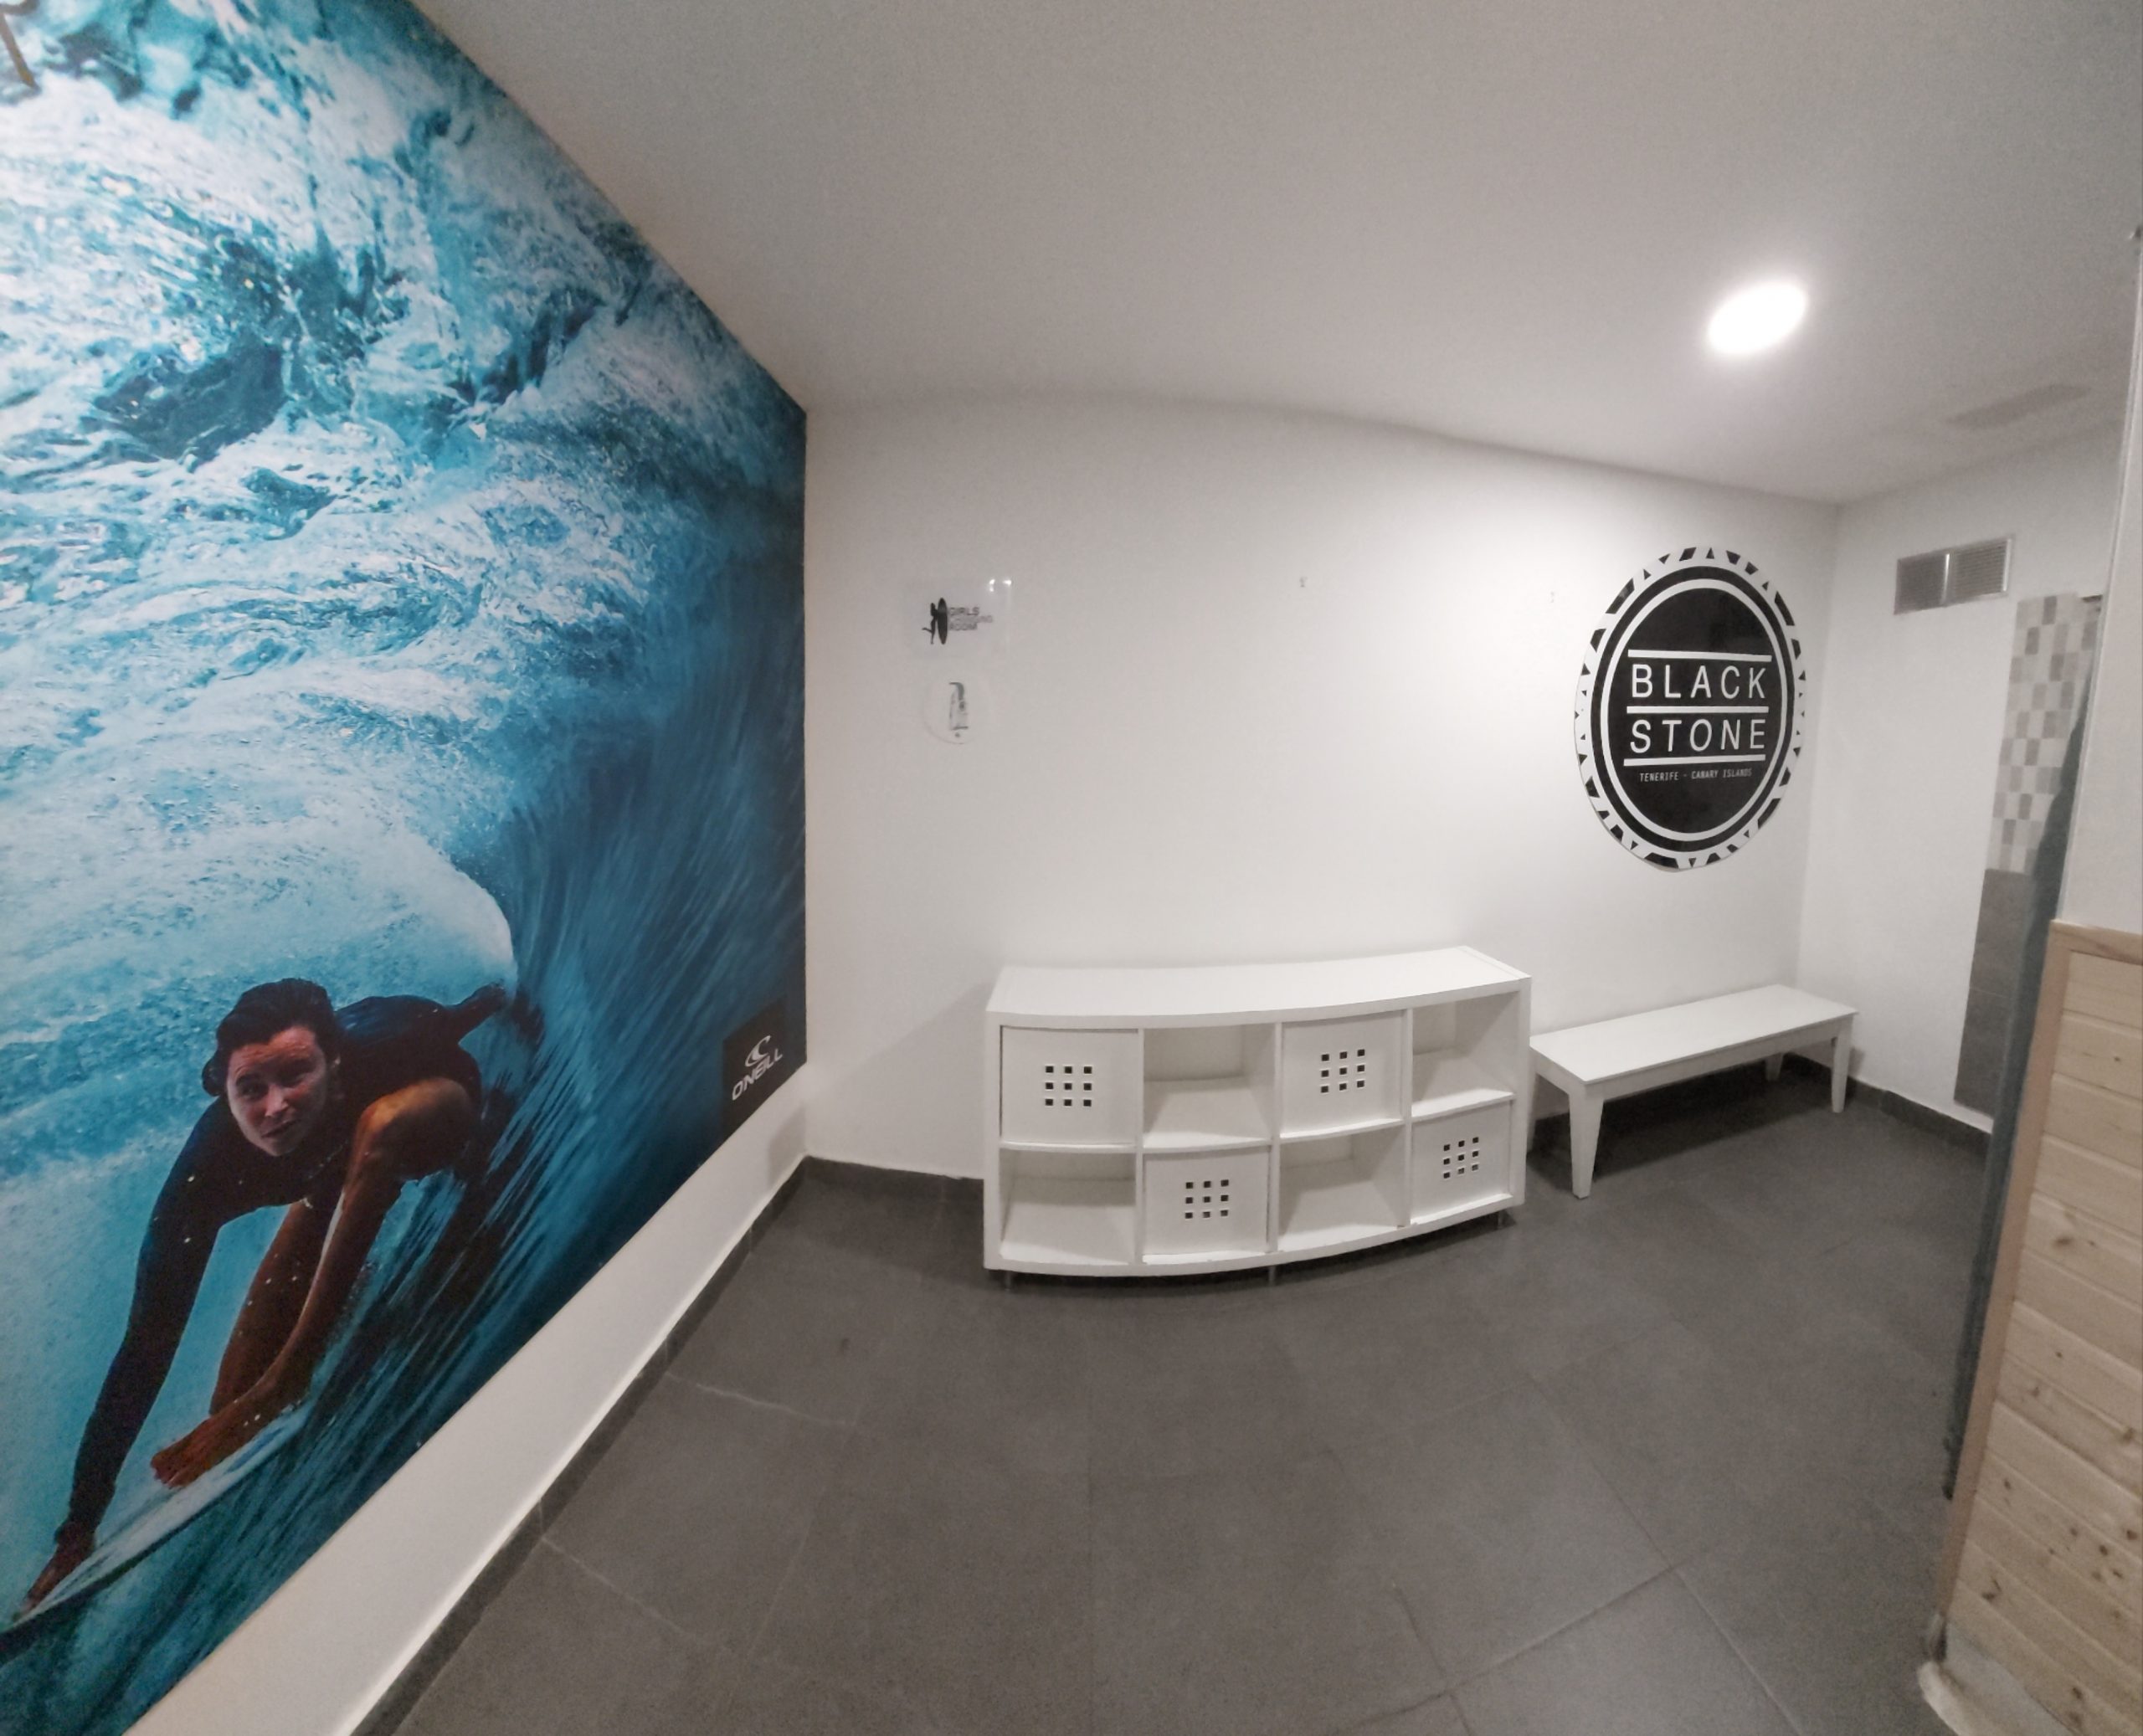 Perfect dressing room, showers and bathrooms of the Blackstone Surf Center in Playa las Américas in Tenerife